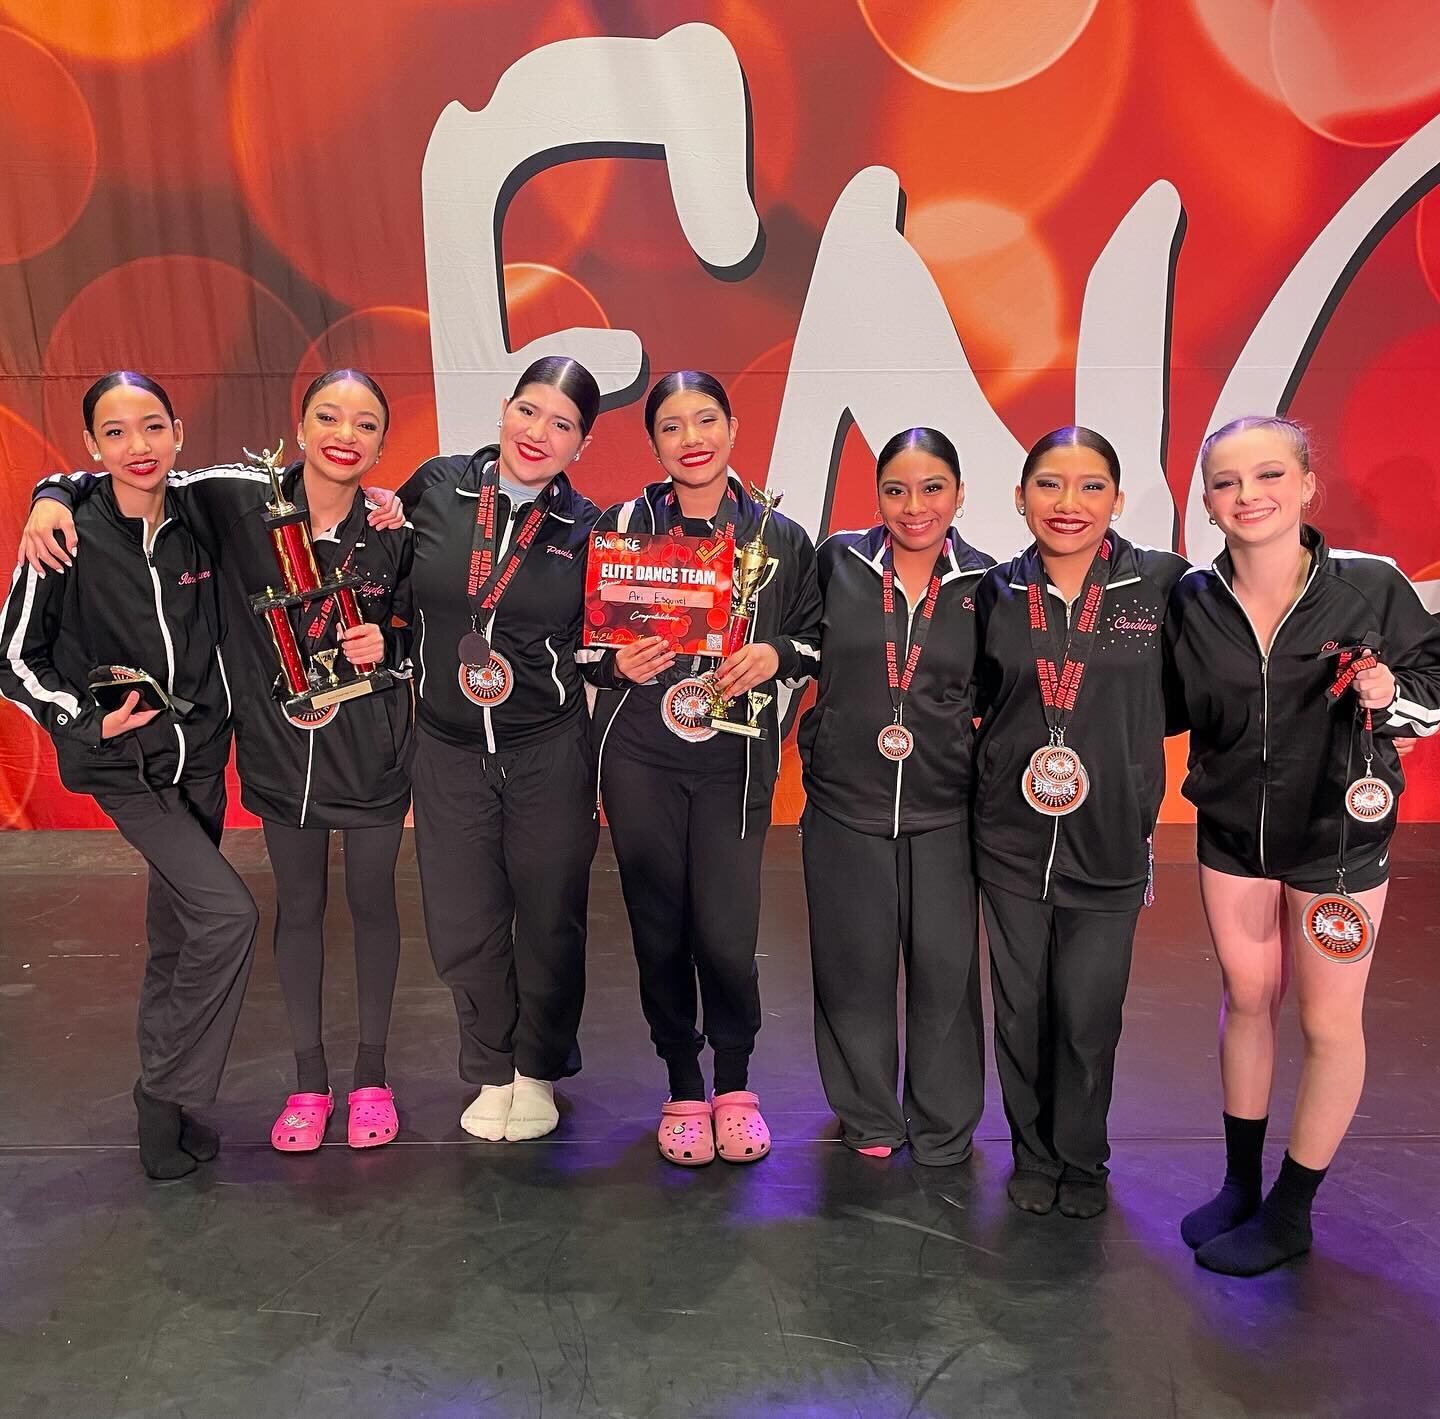 ENCORE DAY 1 is COMPLETE!🪩 Our Diamond dancers shined bright as ever up on the comp stage tonight&hellip; we couldn&rsquo;t be more proud!✨ Listed Below are our overall placements &amp; special award winners! 

Intermediate Age 13 Solos:
9th- Compar